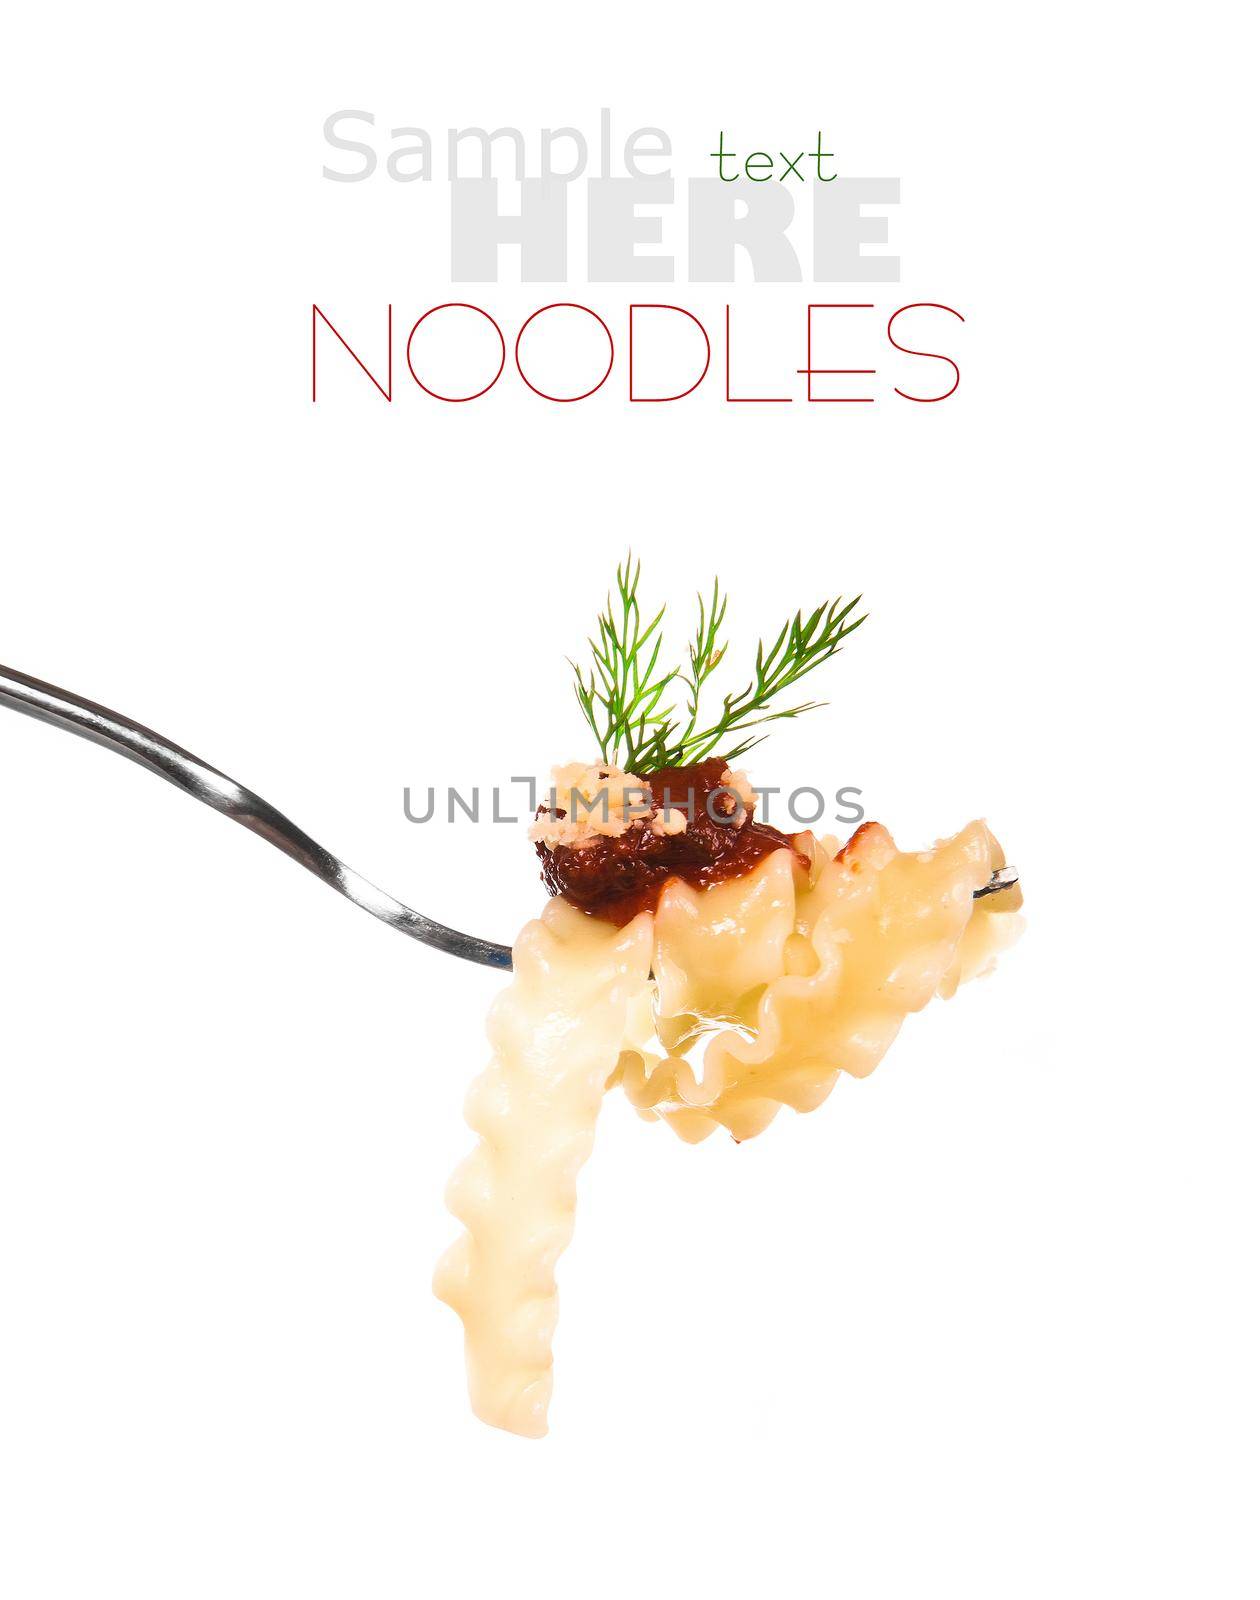 picture of a silver fork with spaghetti noodle over white background